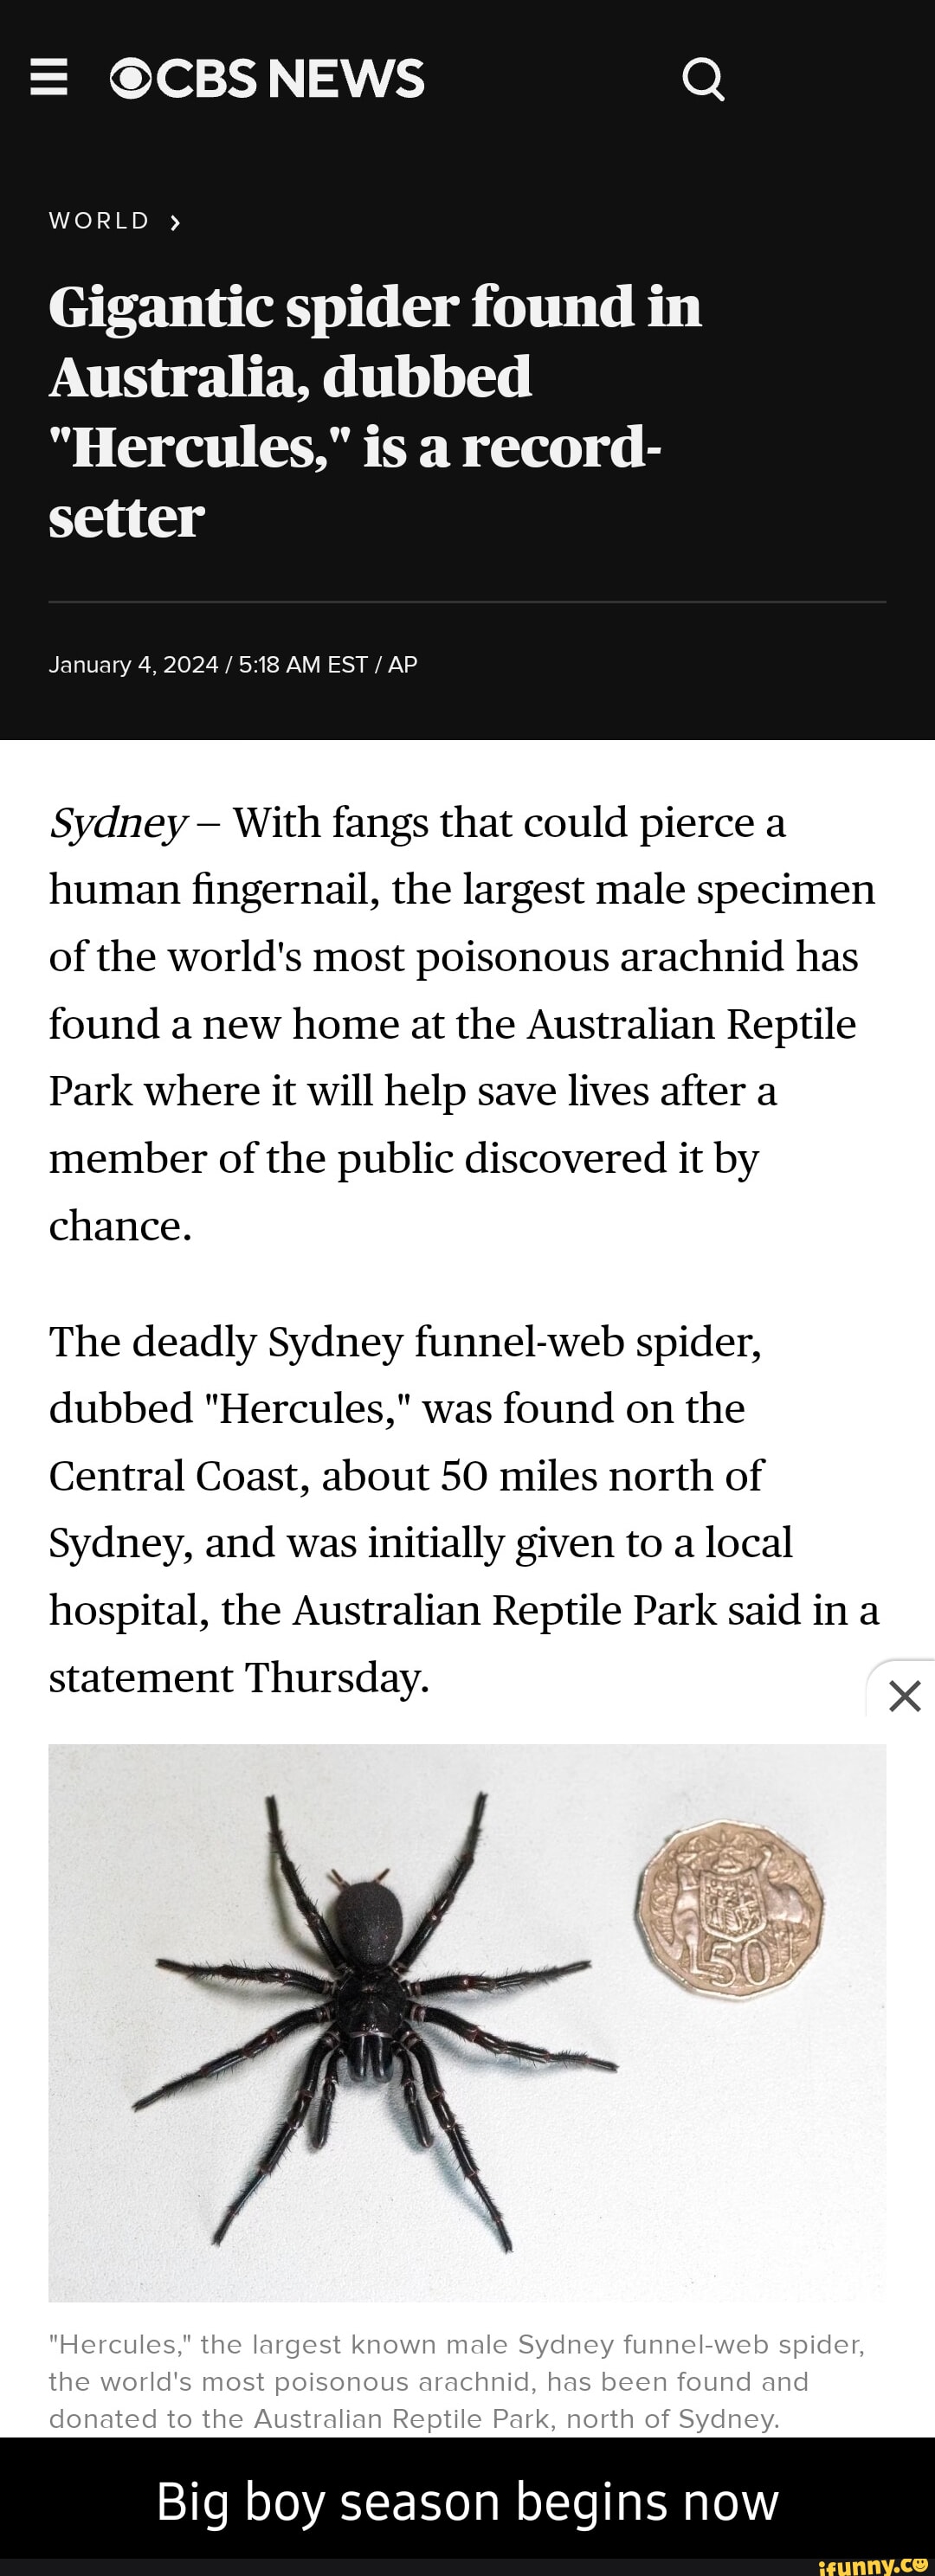 The Discovery of Hercules: The Largest Male Funnel-Web Spider in Australia 6